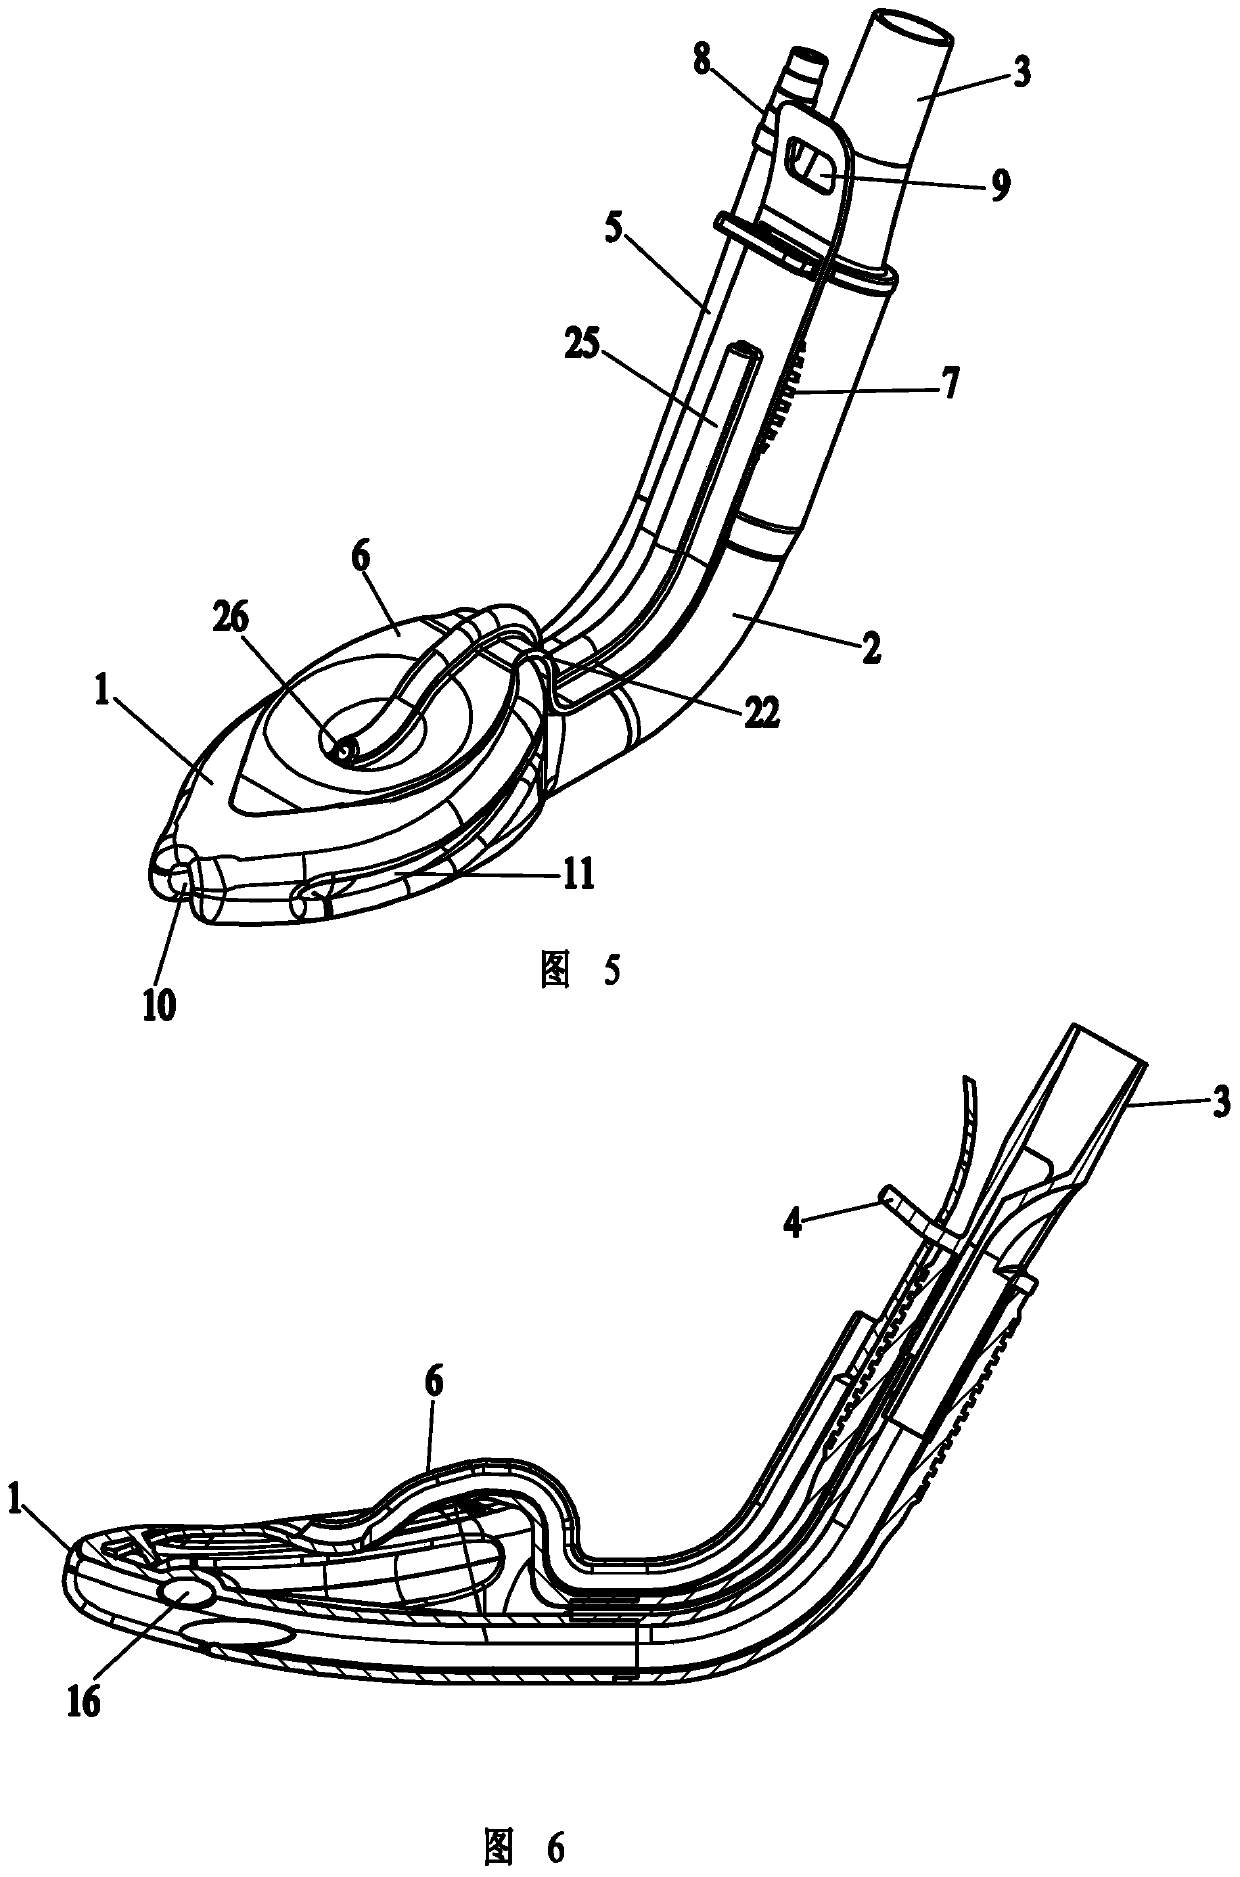 Method, device and system for assisting insertion of laryngeal mask